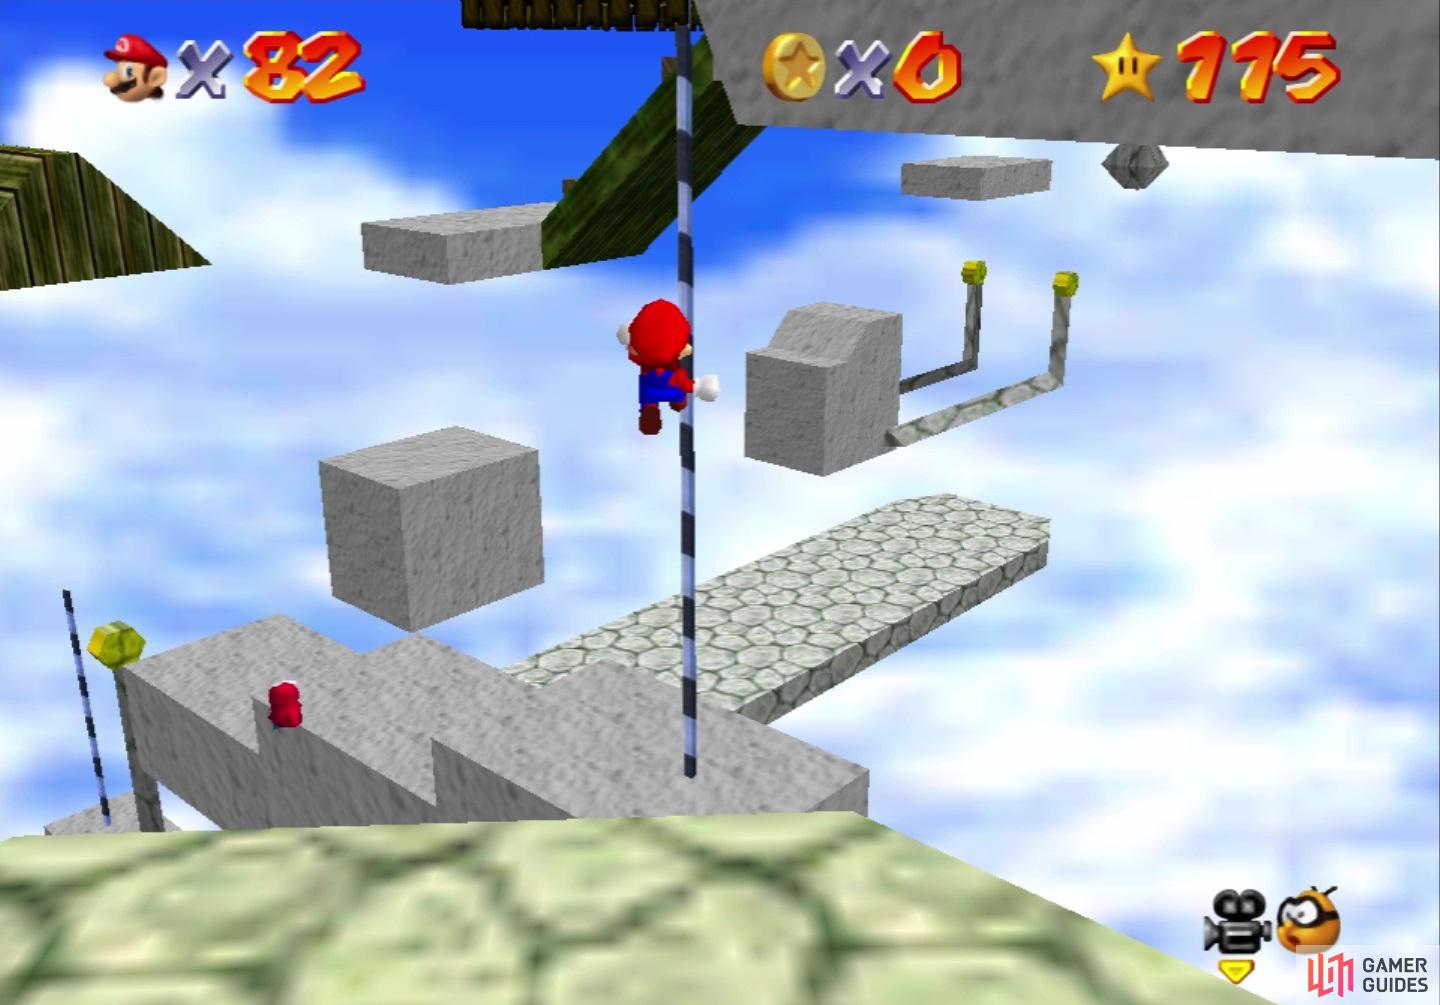 You can Long Jump to the pole from the starting platform